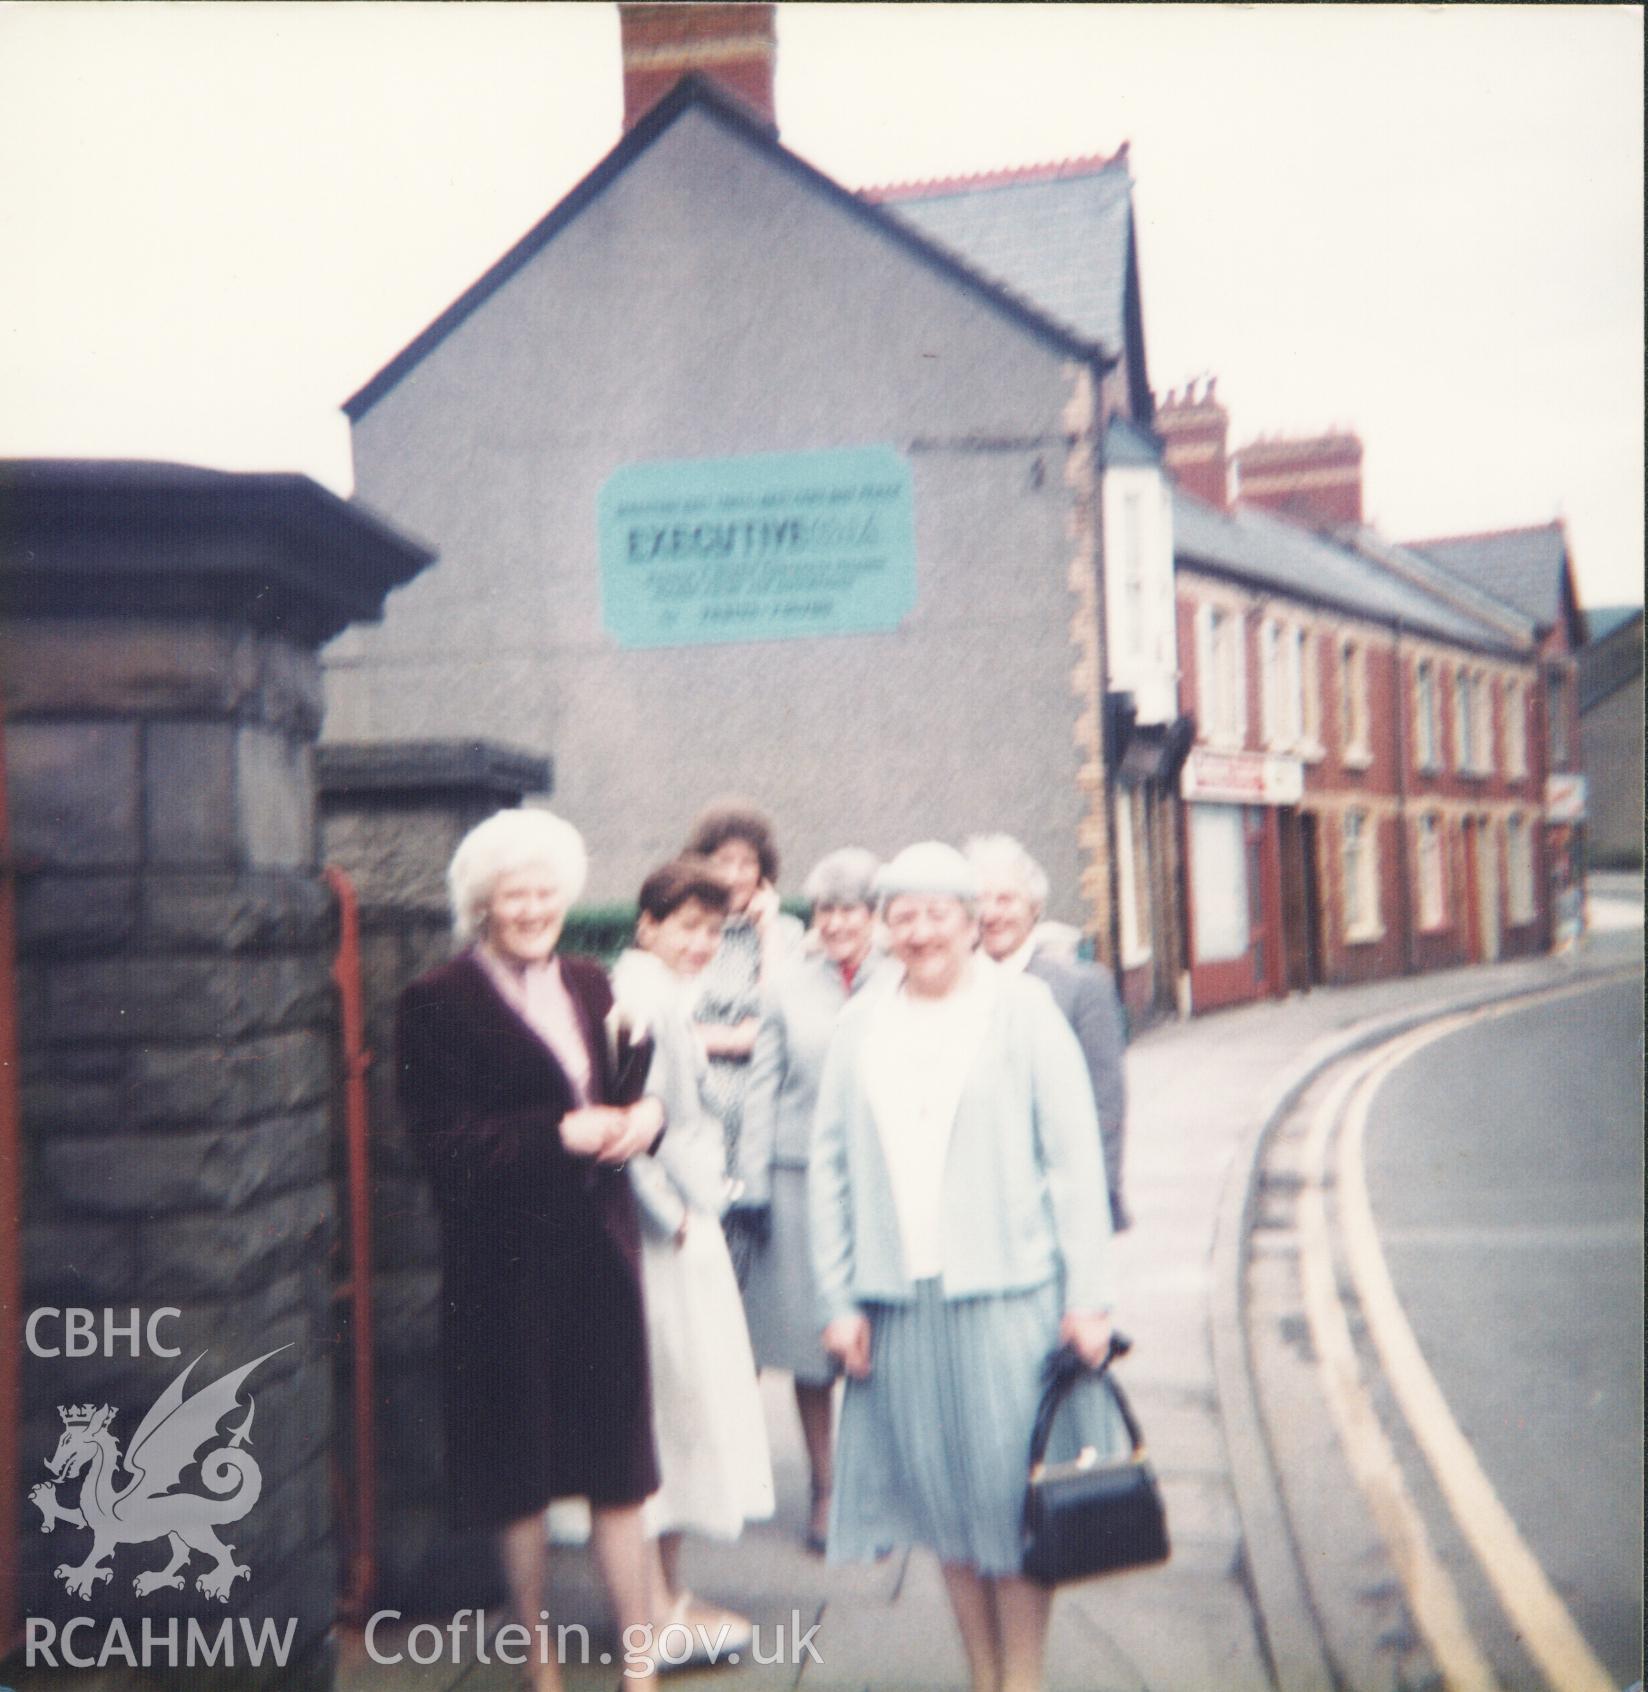 Colour photograph of members of Bethania chapel congregation on the way to chapel, 26th March 1985. Donated to the RCAHMW by Cyril Philips as part of the Digital Dissent Project.